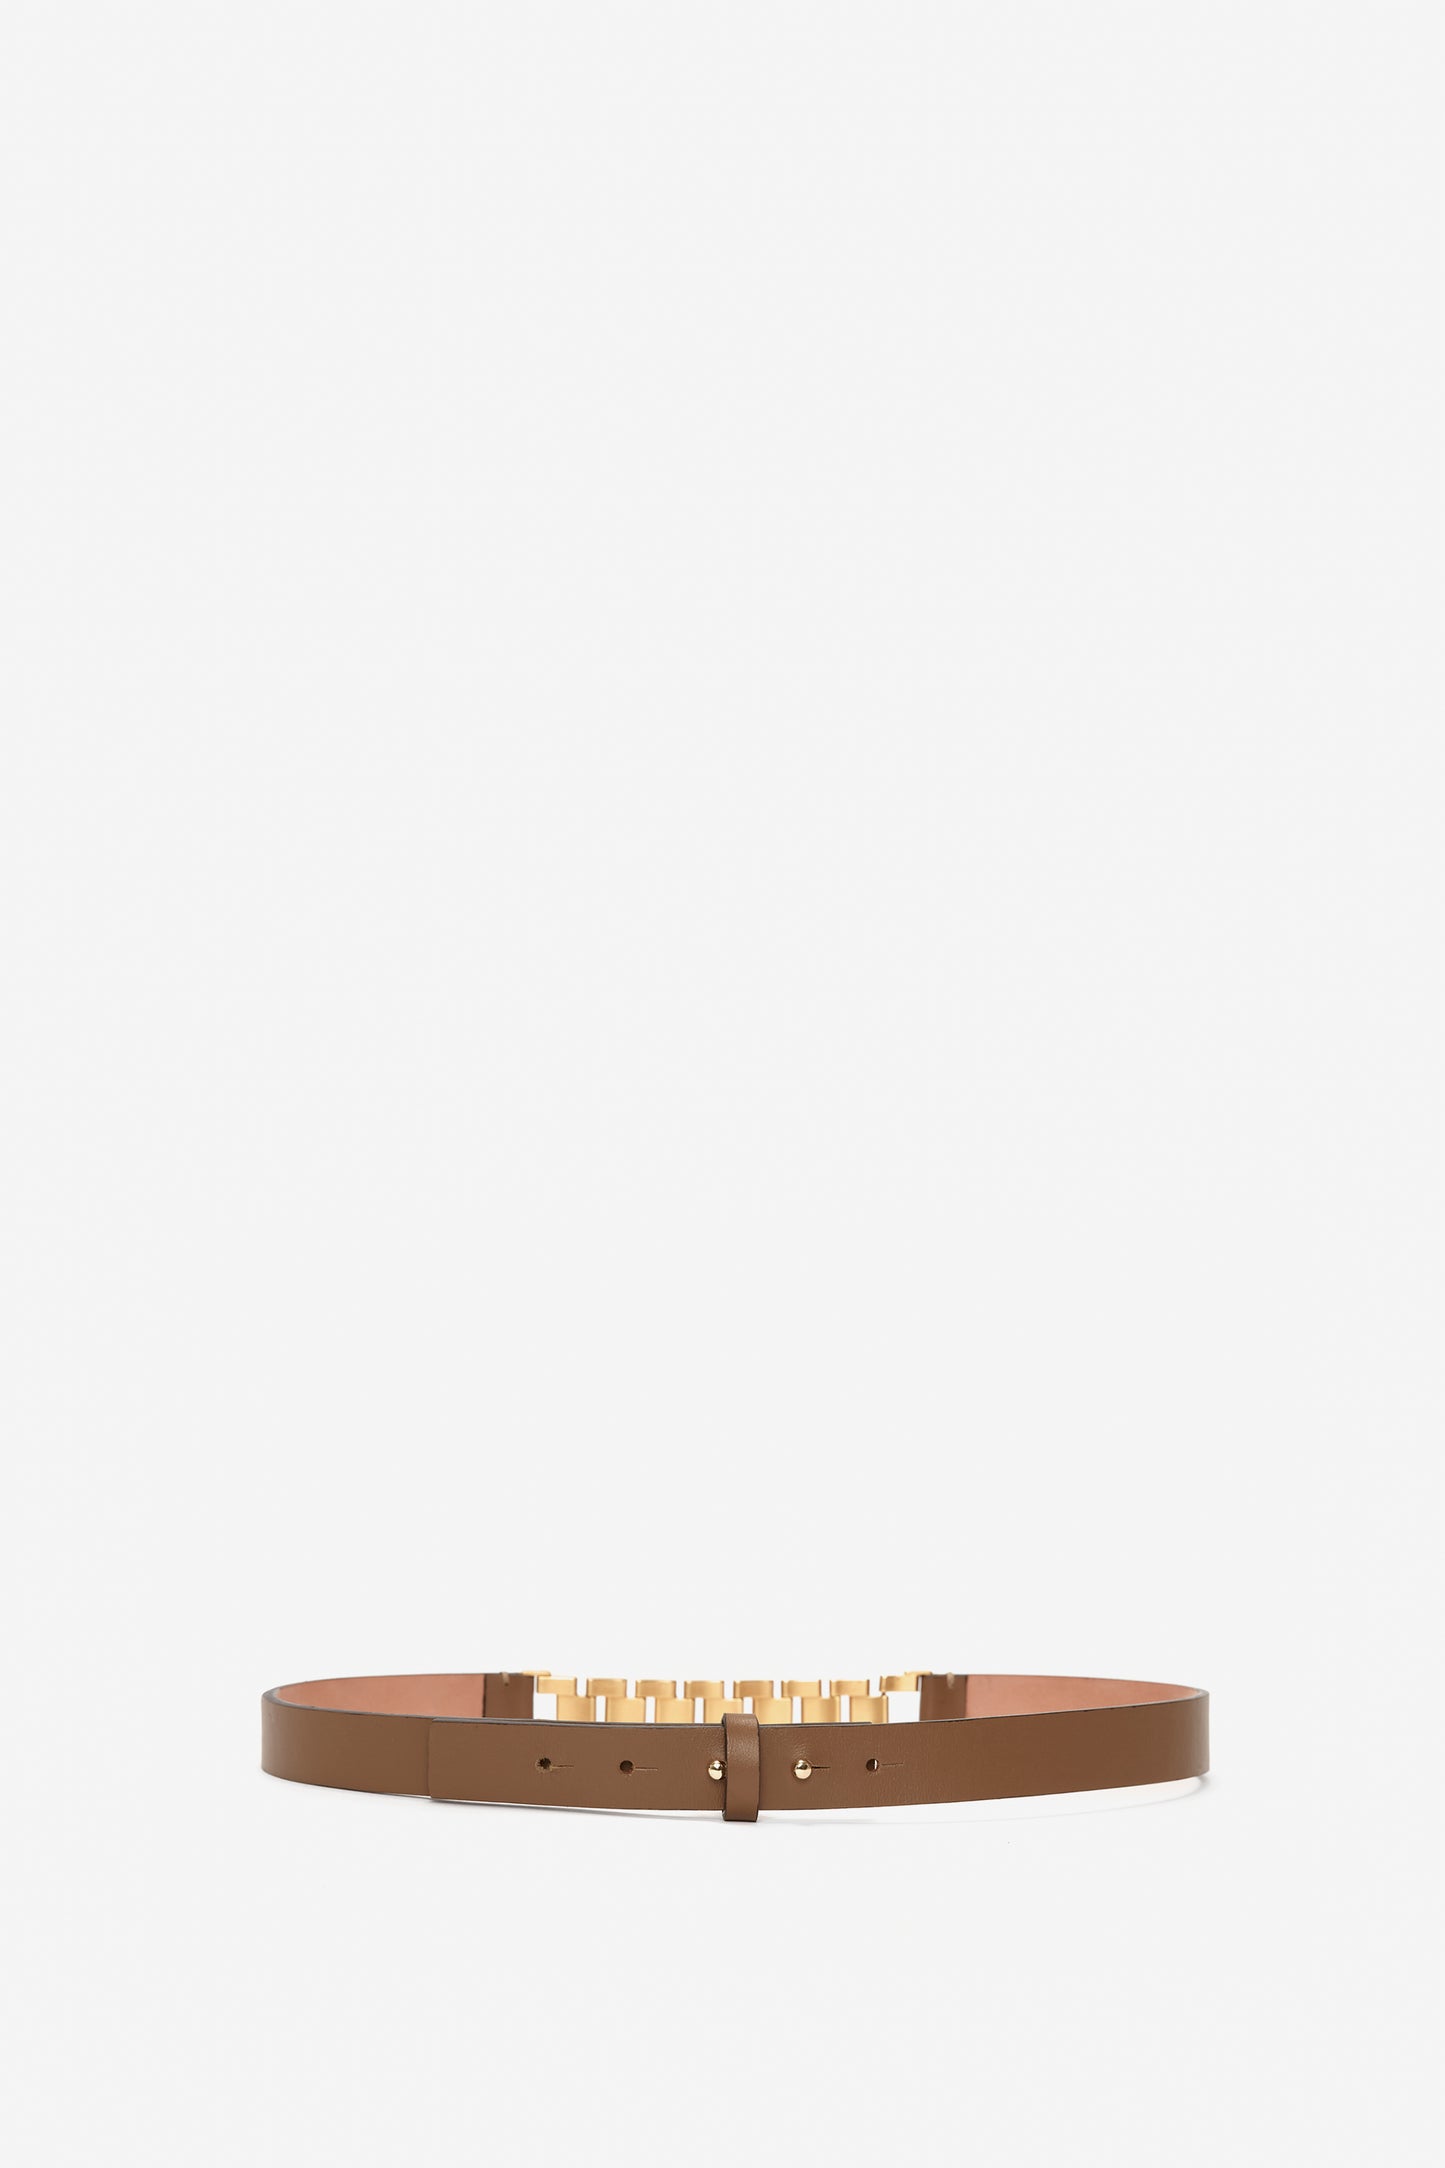 A khaki-brown Watch Strap Detail Belt by Victoria Beckham UK, with a golden, rectangular buckle, displayed against a plain white background.